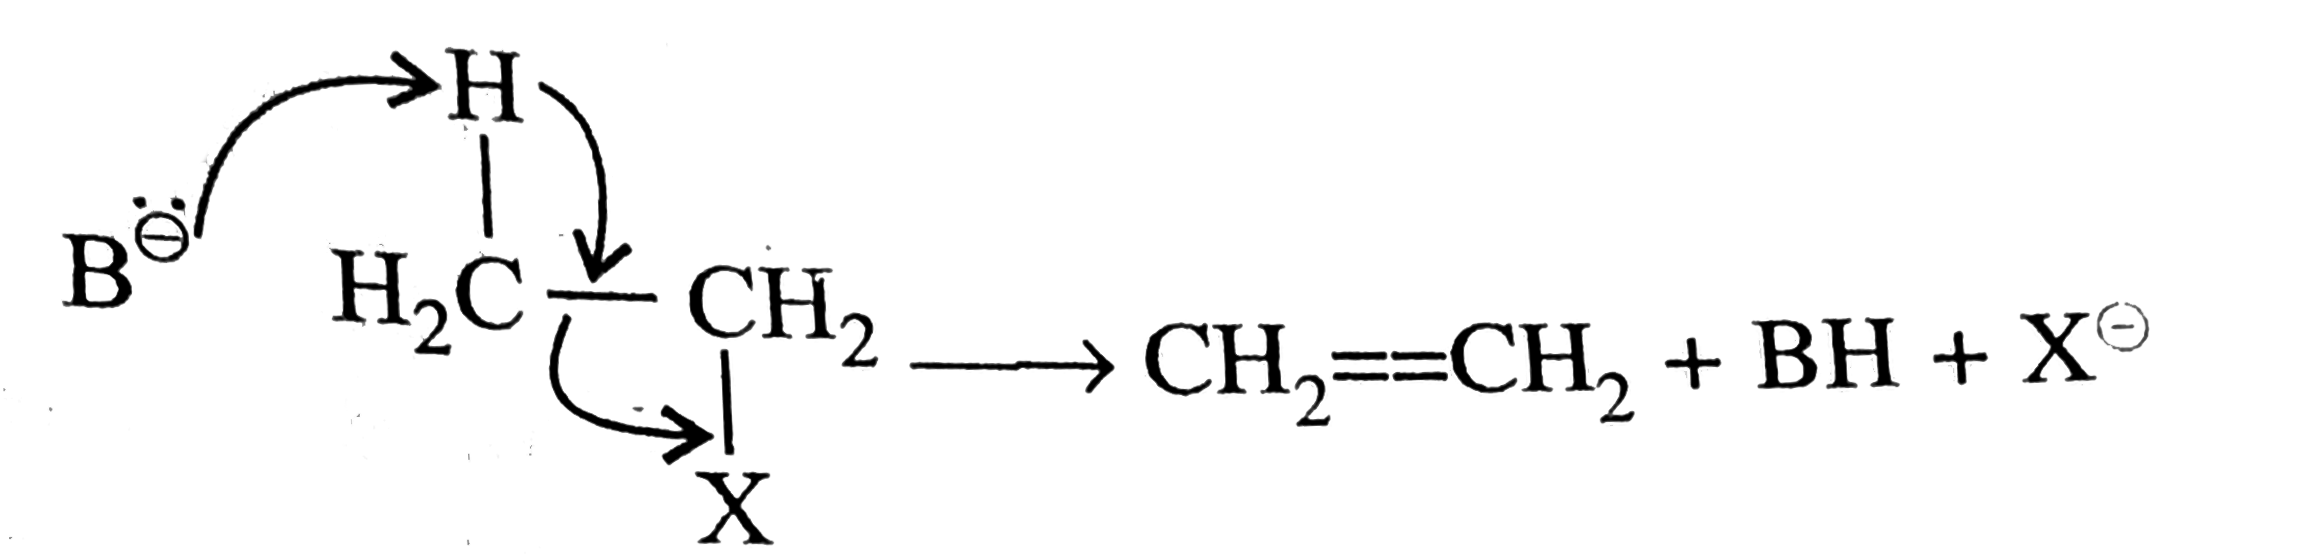 beta- Elimination or anti-eliminination reaction is carried out with base (B^(o-)) as shown below:      The following bases are used.   I. overset(o-)(O)H , II. RO^(o-)   II. RO^(o-)   III. RCOO^(o-) , IV. overset(o-)(C)N   V. NO(3)^(o-)   The decreasing order of reactivity for the above elimination is: